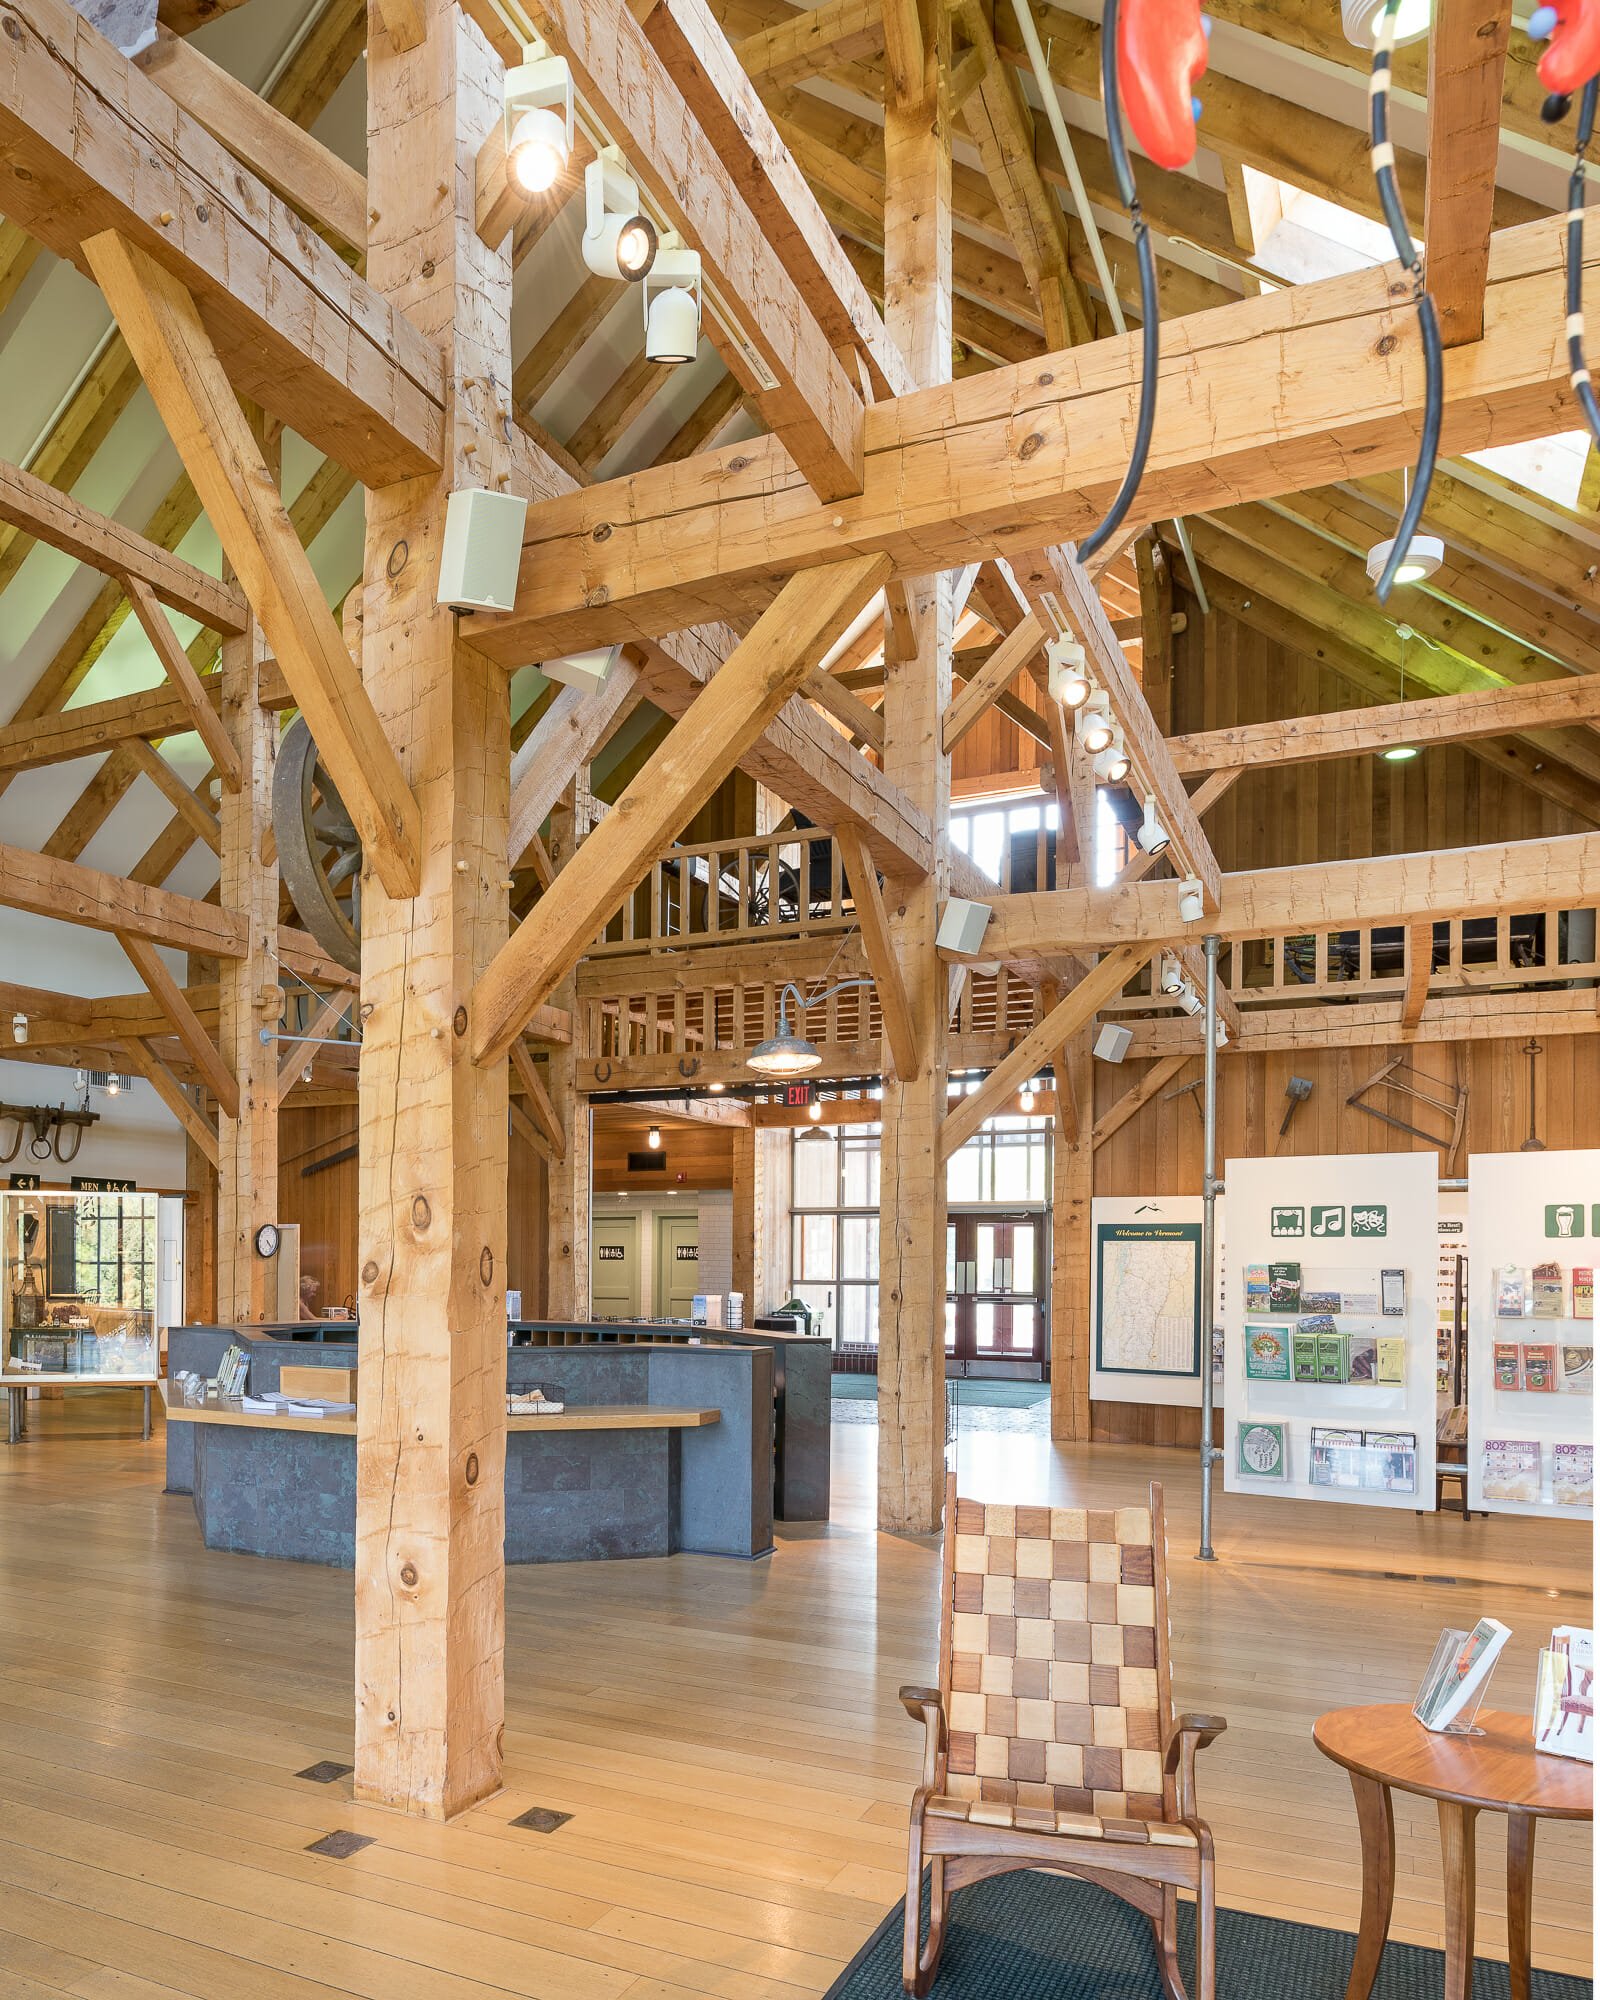 Hand hewn post and beam timber frame barn interior in the Southern Vermont Welcome Center